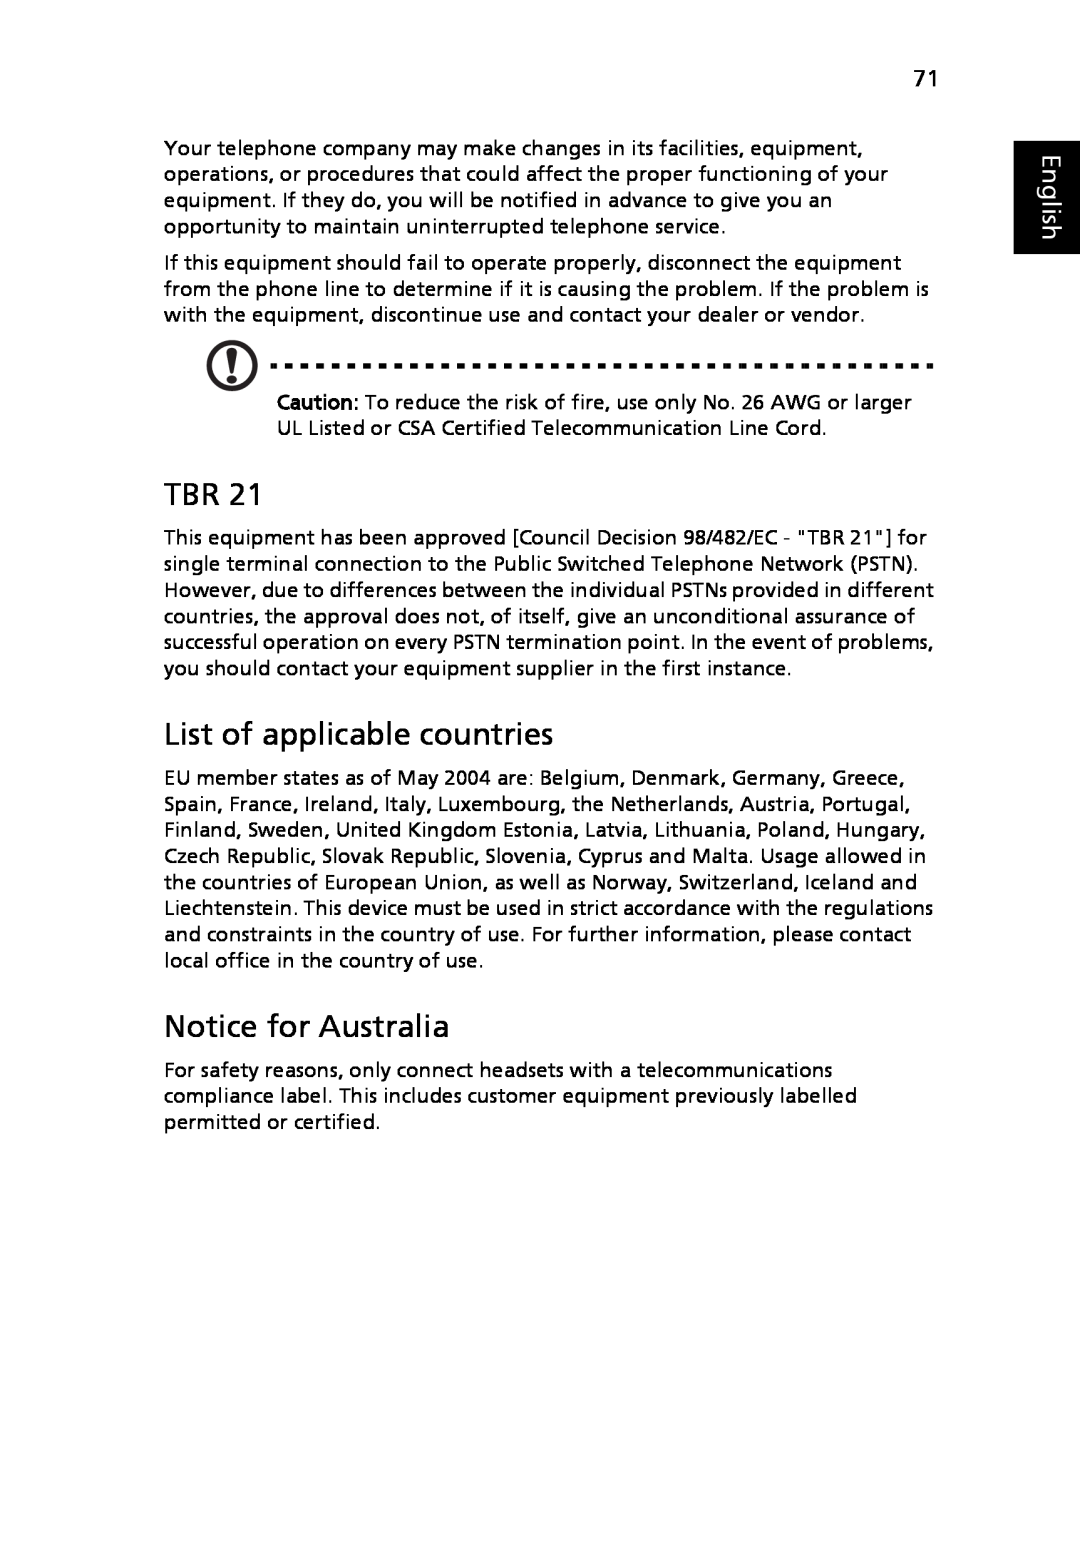 Acer 3040 Series, 3030 Series manual List of applicable countries, Notice for Australia, English 